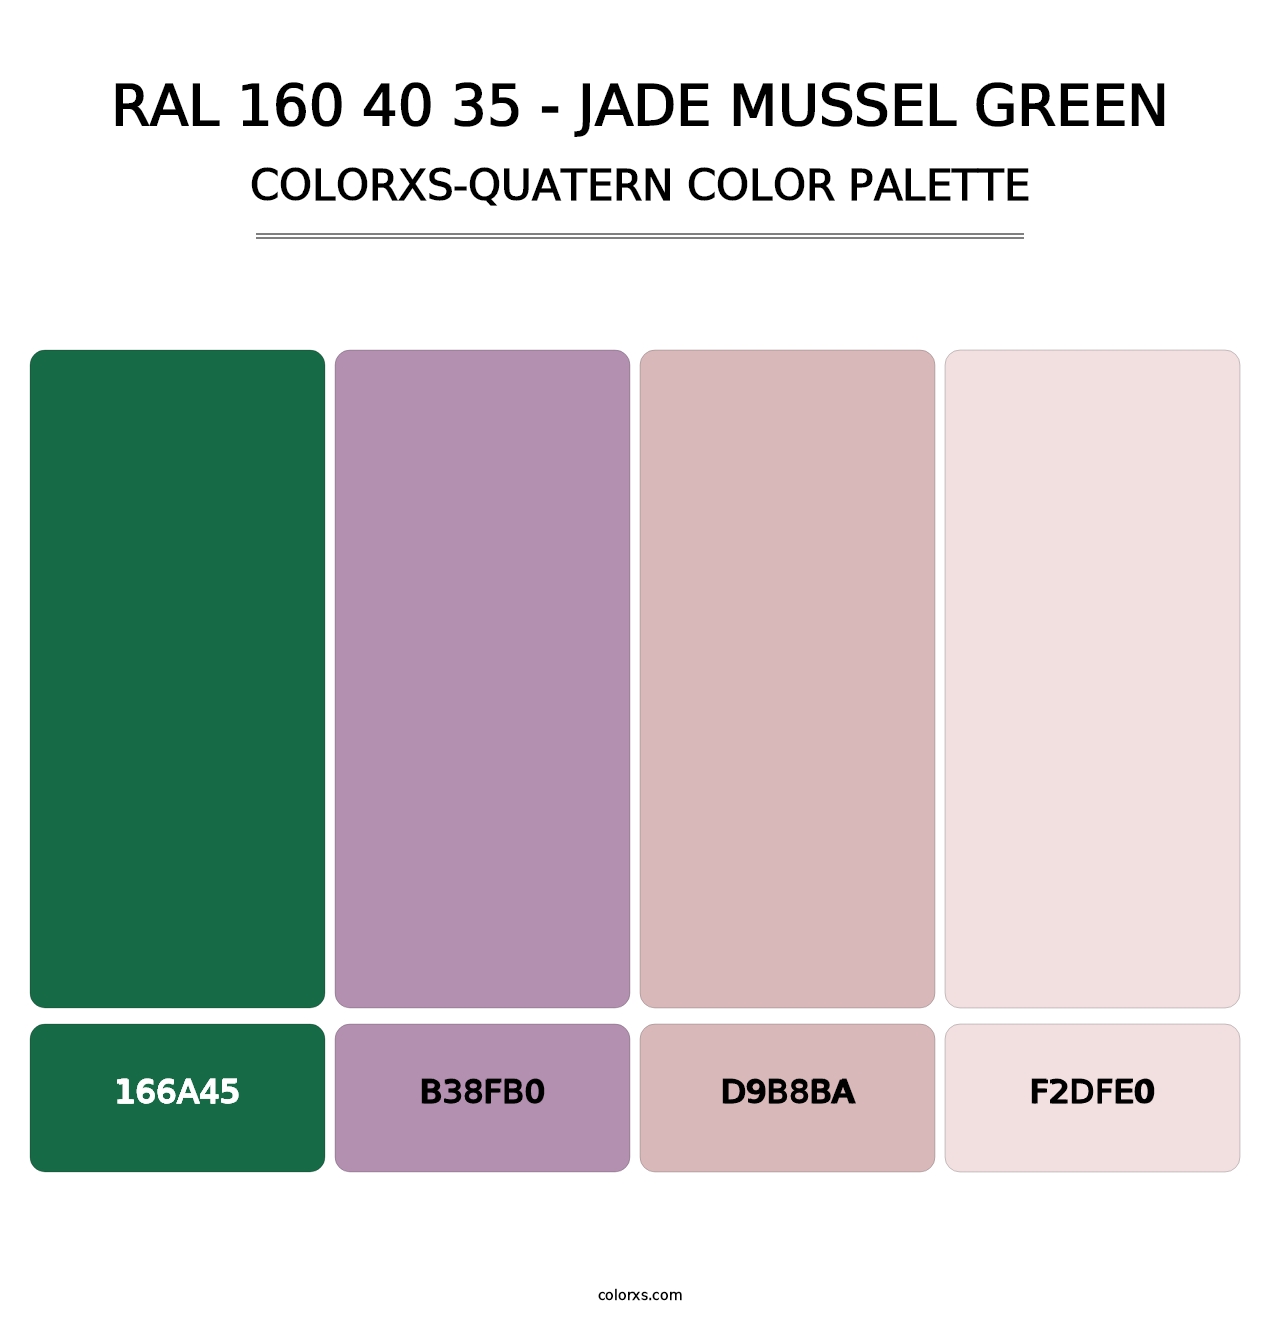 RAL 160 40 35 - Jade Mussel Green - Colorxs Quatern Palette